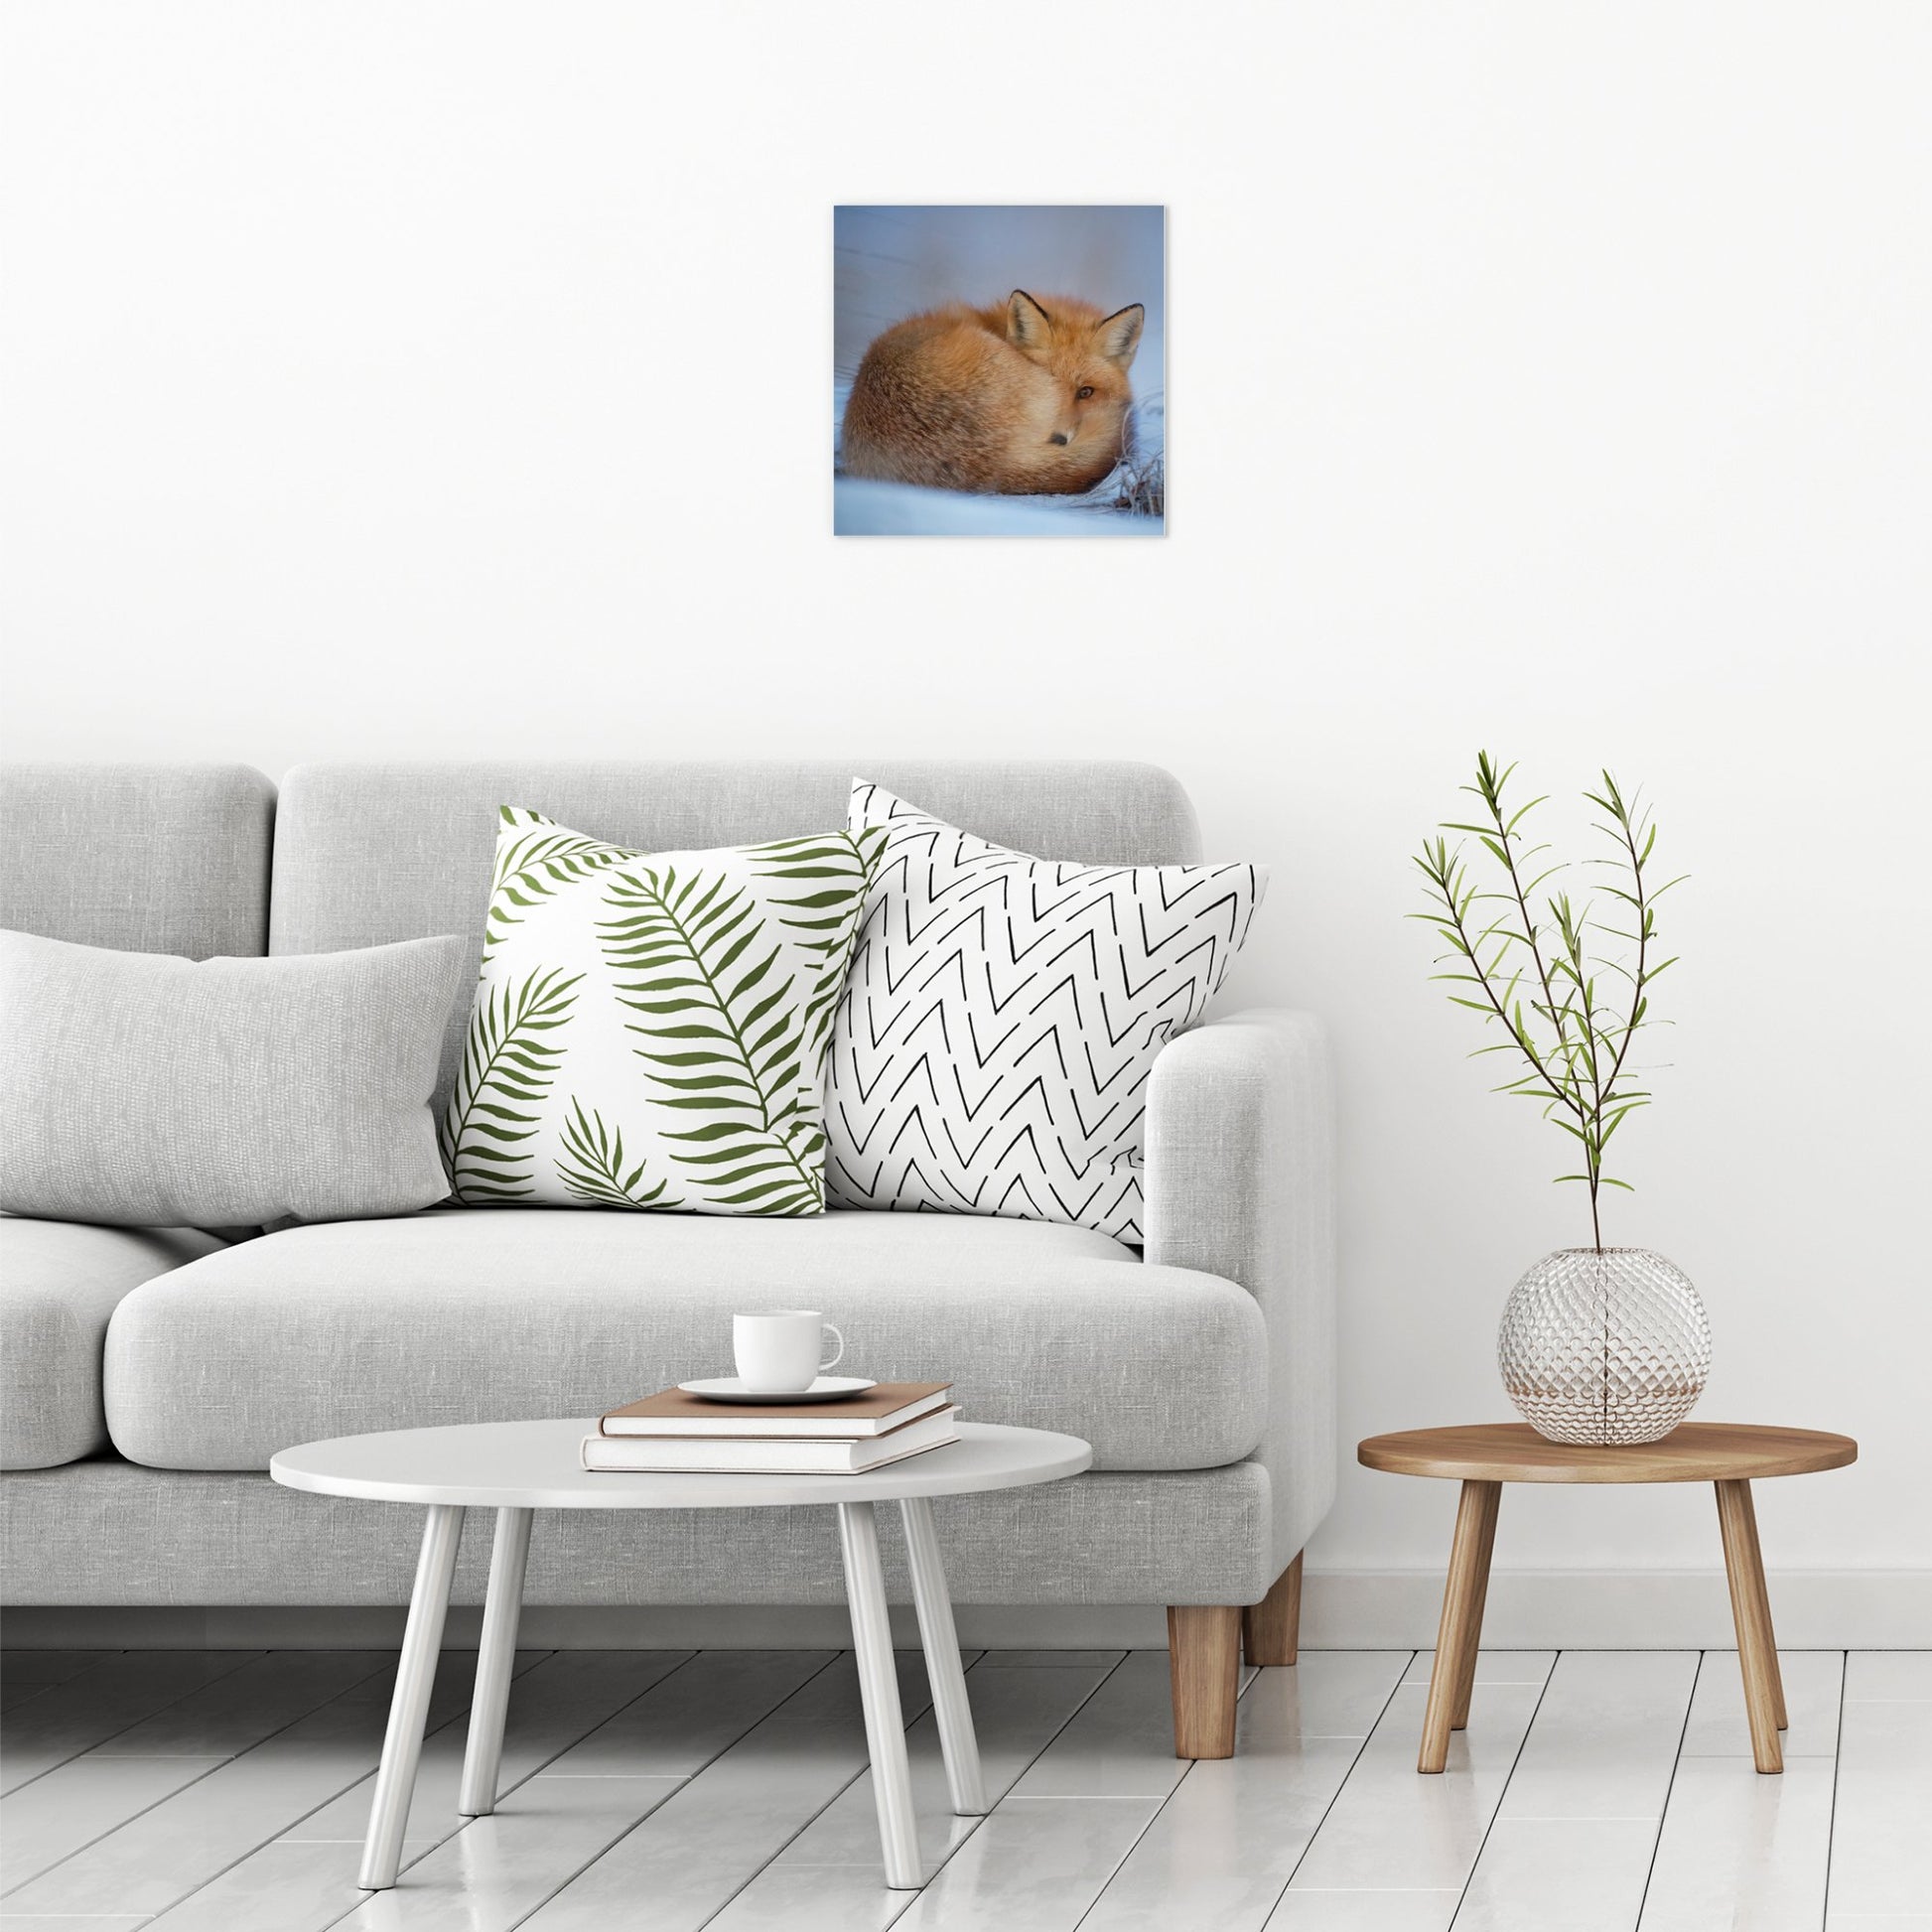 A contemporary modern room view showing a medium size metal art poster display plate with printed design of a A Cute Fox in the Snow